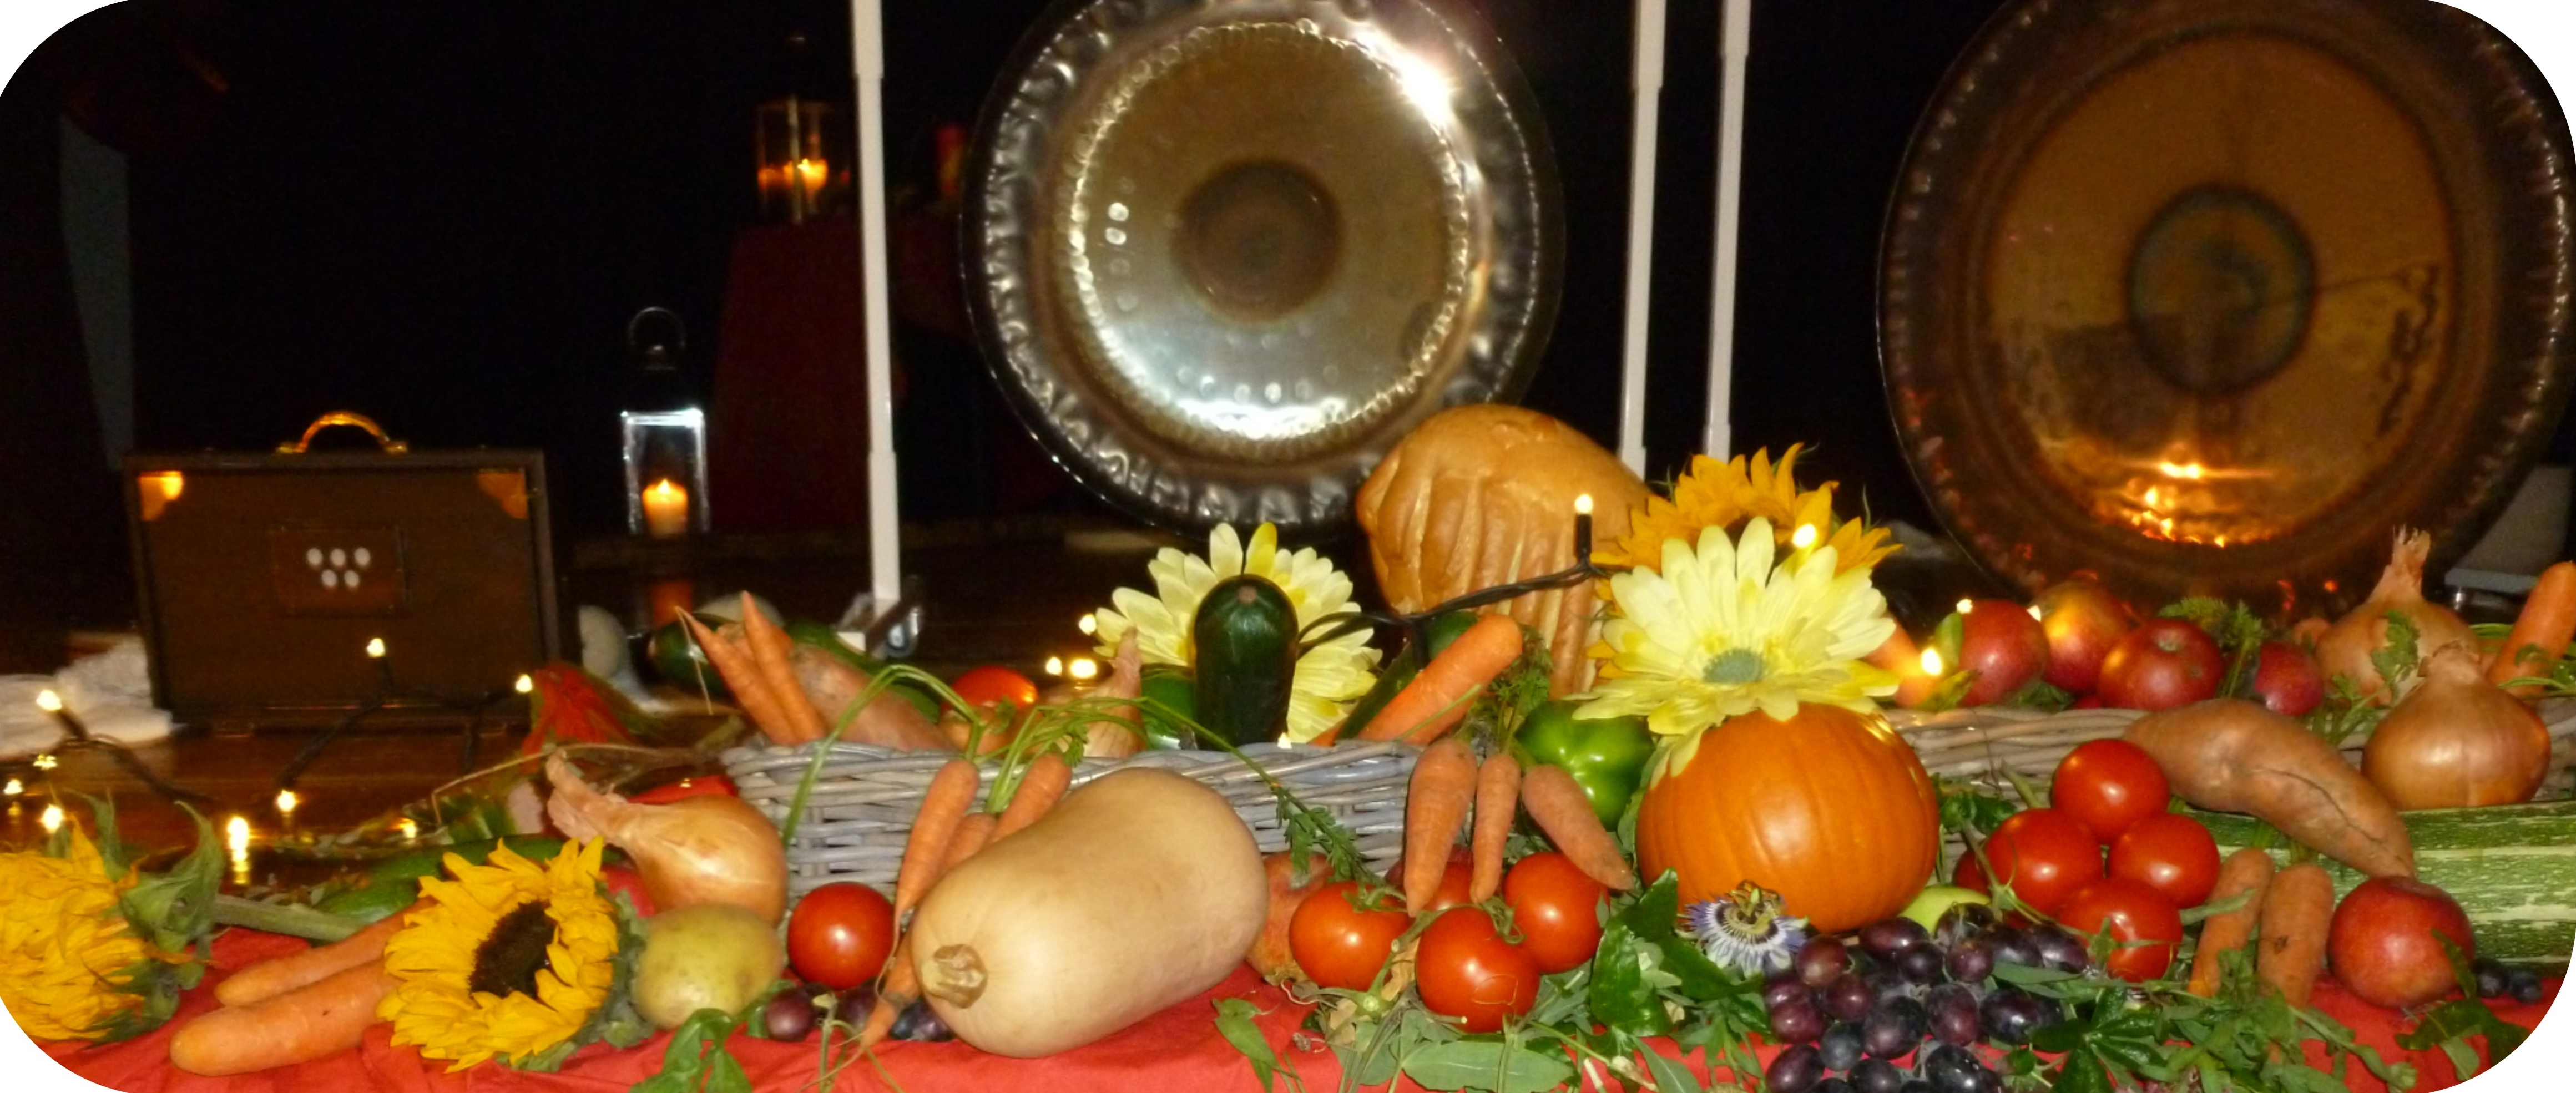 SHEERING, ESSEX - AUTUMN EQUINOX ALL NIGHT CHARITY GONG PUJA